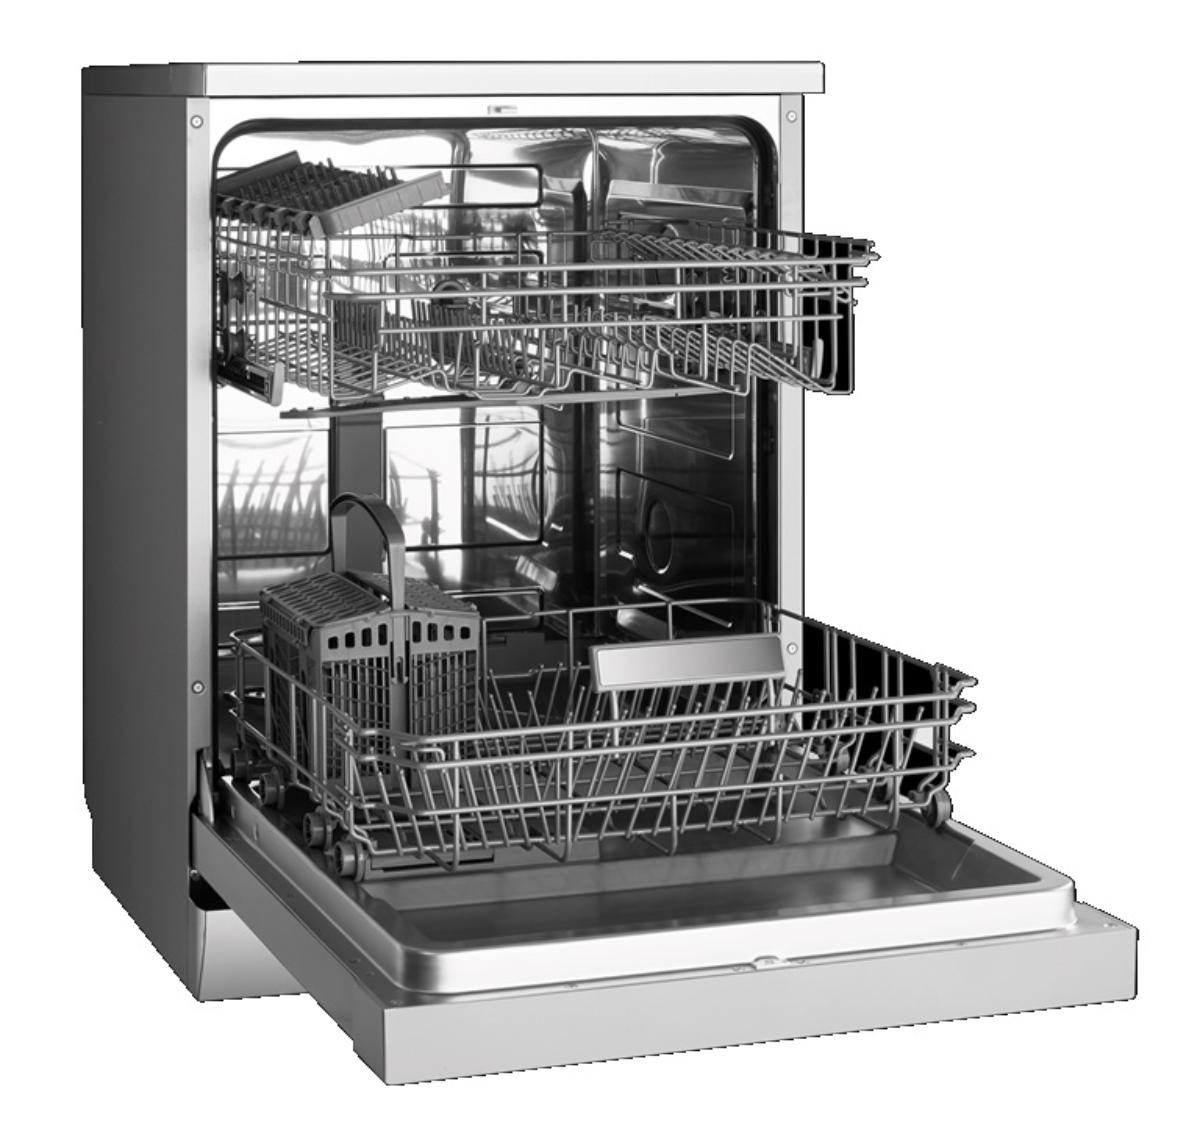 FREESTANDING DISHWASHER COMMERCIAL ONLY